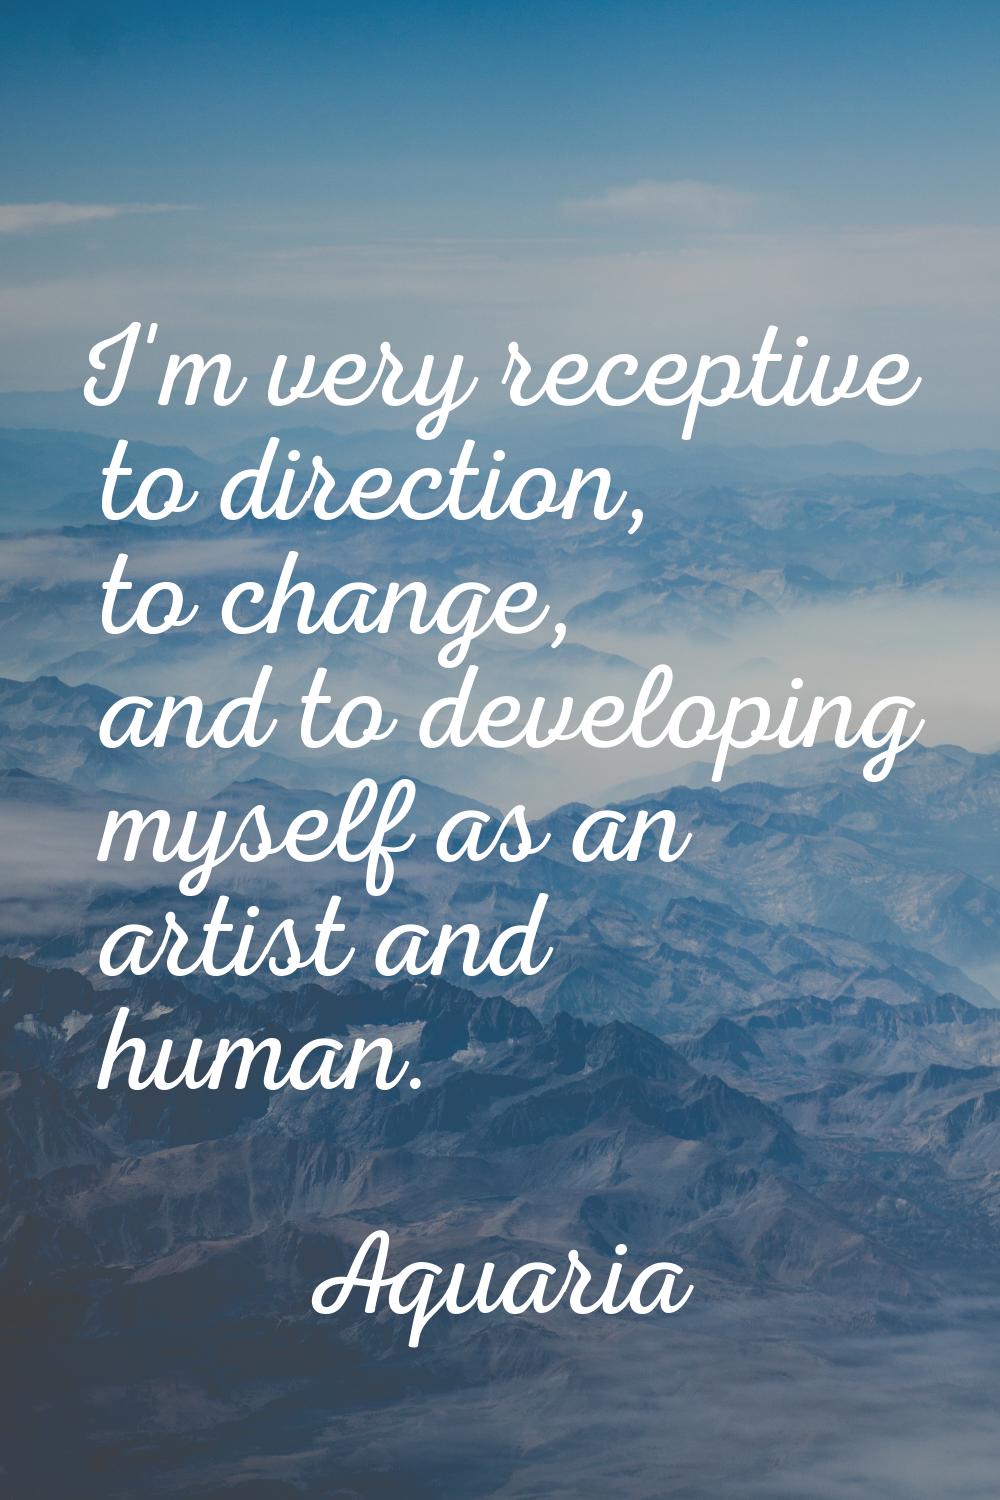 I'm very receptive to direction, to change, and to developing myself as an artist and human.